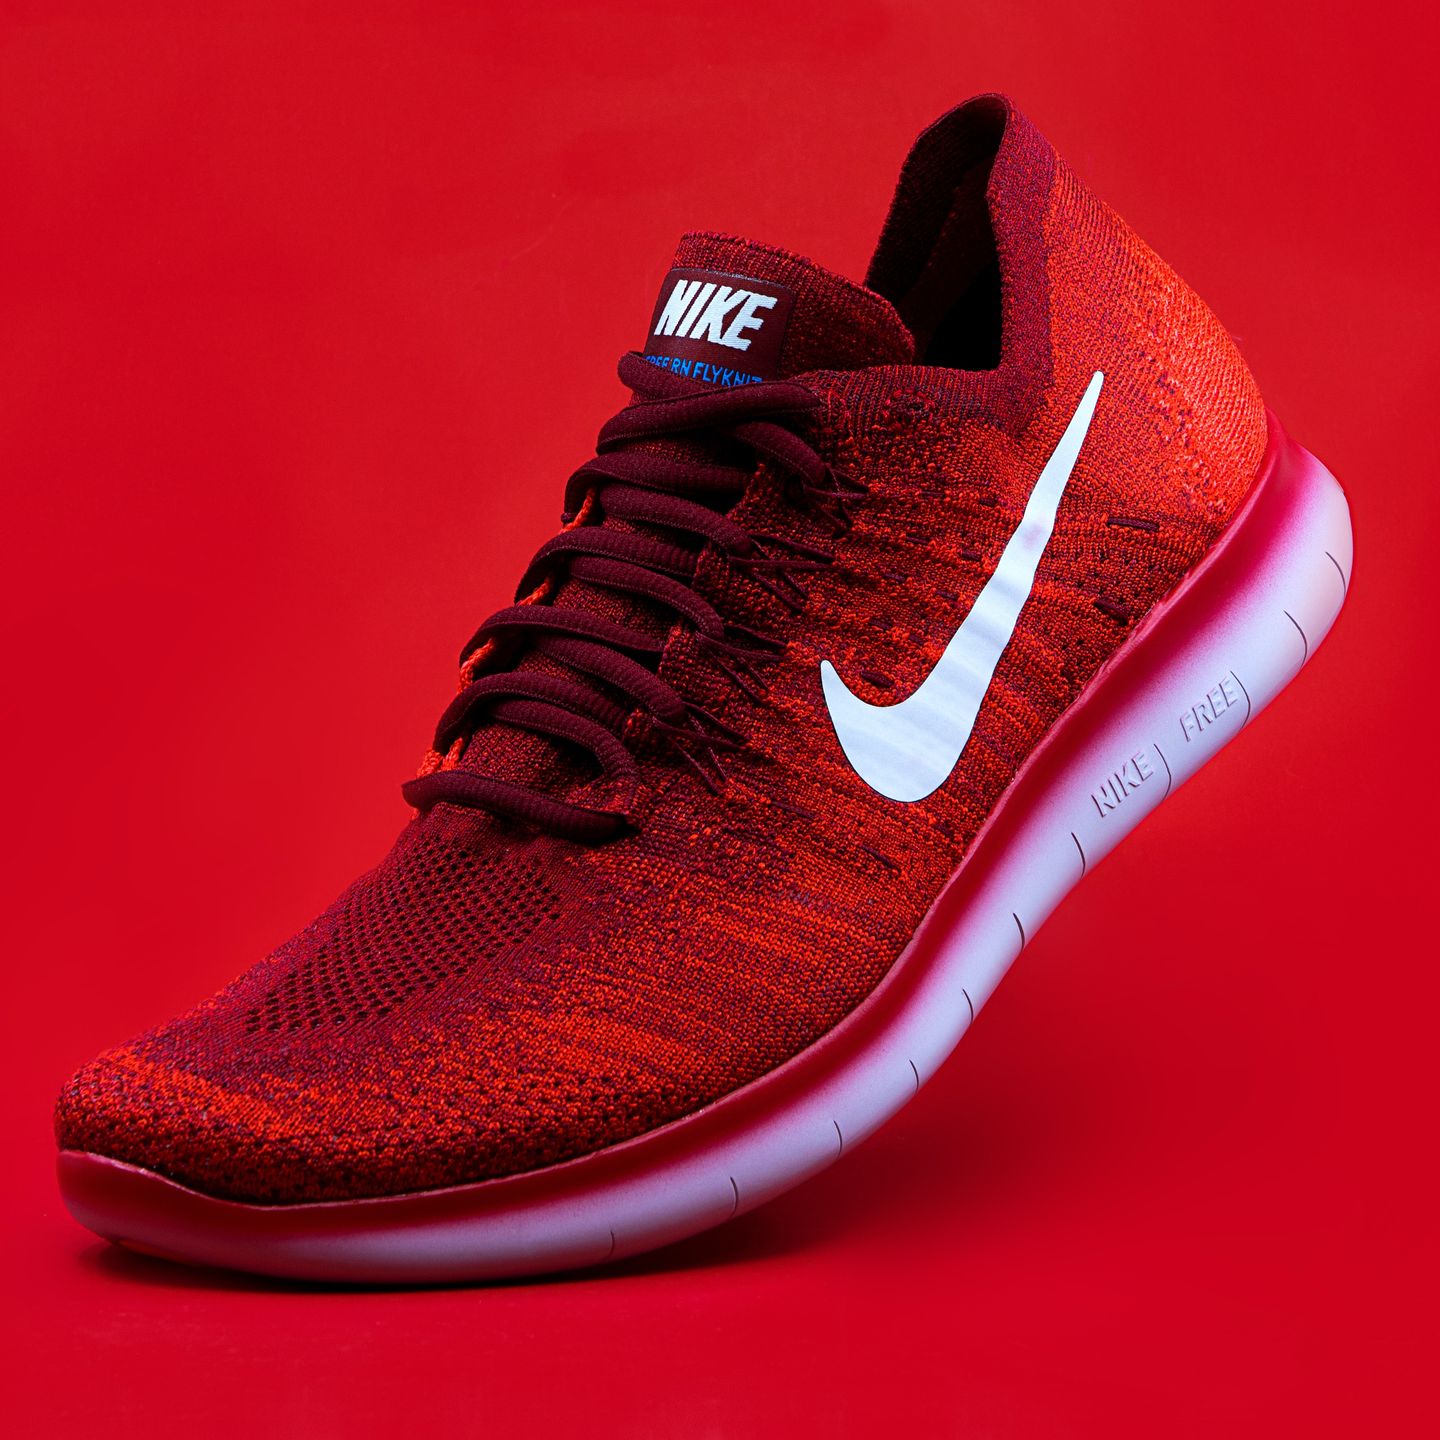 a red nike shoe is on a red background​​​​‌﻿‍﻿​‍​‍‌‍﻿﻿‌﻿​‍‌‍‍‌‌‍‌﻿‌‍‍‌‌‍﻿‍​‍​‍​﻿‍‍​‍​‍‌﻿​﻿‌‍​‌‌‍﻿‍‌‍‍‌‌﻿‌​‌﻿‍‌​‍﻿‍‌‍‍‌‌‍﻿﻿​‍​‍​‍﻿​​‍​‍‌‍‍​‌﻿​‍‌‍‌‌‌‍‌‍​‍​‍​﻿‍‍​‍​‍‌‍‍​‌﻿‌​‌﻿‌​‌﻿​​‌﻿​﻿​﻿‍‍​‍﻿﻿​‍﻿﻿‌﻿‌‍‌‍‍‌‌﻿​﻿‌﻿‌‌‌‍​‌‌‍﻿​​‍﻿‌‌‍‌‌‌‍‌​‌‍‍‌‌﻿‌​‌‍‍‌‌‍﻿‍‌‍‌﻿​‍﻿‌‌﻿​﻿‌﻿‌​‌﻿‌‌‌‍‌​‌‍‍‌‌‍﻿﻿​‍﻿‍‌﻿​﻿‌‍​‌‌‍﻿‍‌‍‍‌‌﻿‌​‌﻿‍‌​‍﻿‍‌‍​‍‌﻿‌‌‌‍‍‌‌‍﻿​‌‍‌​​‍﻿﻿‌﻿​‍‌‍‌‌‌‍﻿‌‌‍‍‌‌﻿‍​​‍﻿﻿‌‍‍‌‌‍﻿‍‌﻿‌​‌‍‌‌‌‍﻿‍‌﻿‌​​‍﻿﻿‌‍‌‌‌‍‌​‌‍‍‌‌﻿‌​​‍﻿﻿‌‍﻿‌‌‍﻿﻿‌‍‌​‌‍‌‌​﻿﻿‌‌﻿​​‌﻿​‍‌‍‌‌‌﻿​﻿‌‍‌‌‌‍﻿‍‌﻿‌​‌‍​‌‌﻿‌​‌‍‍‌‌‍﻿﻿‌‍﻿‍​﻿‍﻿‌‍‍‌‌‍‌​​﻿﻿‌​﻿‌﻿​﻿‌﻿‌‍‌‍​﻿​‍‌‍​‌​﻿‍​‌‍​﻿​﻿‍​​‍﻿‌‌‍‌‍​﻿​﻿‌‍‌‍​﻿​​​‍﻿‌​﻿‌​​﻿‍​​﻿​​​﻿‌﻿​‍﻿‌​﻿‍‌​﻿​﻿‌‍​‍​﻿​‍​‍﻿‌​﻿‌‍​﻿​‌‌‍‌‍​﻿​‌‌‍‌‍​﻿‌‍​﻿‌​​﻿‍​‌‍​﻿​﻿‌﻿​﻿​‌​﻿​‌​﻿‍﻿‌﻿‌​‌﻿‍‌‌﻿​​‌‍‌‌​﻿﻿‌‌﻿​﻿‌‍‍​‌‍﻿﻿‌‍‌‌​﻿‍﻿‌﻿​​‌‍​‌‌﻿‌​‌‍‍​​﻿﻿‌‌‍﻿‌‌‍‌‌‌‍‌​‌‍‍‌‌‍​‌​‍‌‌​﻿‌‌‌​​‍‌‌﻿﻿‌‍‍﻿‌‍‌‌‌﻿‍‌​‍‌‌​﻿​﻿‌​‌​​‍‌‌​﻿​﻿‌​‌​​‍‌‌​﻿​‍​﻿​‍‌‍​﻿‌‍‌‌‌‍‌​‌‍​﻿​﻿‌​​﻿‍​​﻿‌﻿​﻿‍​​﻿​​‌‍​‍​﻿​‍‌‍​‌​‍‌‌​﻿​‍​﻿​‍​‍‌‌​﻿‌‌‌​‌​​‍﻿‍‌‍​‌‌‍﻿​‌﻿‌​​﻿‍﻿‌﻿‌​‌‍﻿﻿‌‍﻿﻿‌‍﻿​​﻿﻿‌‌﻿​​‌﻿​‍‌‍‌‌‌﻿​﻿‌‍‌‌‌‍﻿‍‌﻿‌​‌‍​‌‌﻿‌​‌‍‍‌‌‍﻿﻿‌‍﻿‍​﻿﻿﻿‌‍​‍‌‍​‌‌﻿​﻿‌‍‌‌‌‌‌‌‌﻿​‍‌‍﻿​​﻿﻿‌‌‍‍​‌﻿‌​‌﻿‌​‌﻿​​‌﻿​﻿​‍‌‌​﻿​﻿‌​​‌​‍‌‌​﻿​‍‌​‌‍​‍‌‌​﻿​‍‌​‌‍‌﻿‌‍‌‍‍‌‌﻿​﻿‌﻿‌‌‌‍​‌‌‍﻿​​‍﻿‌‌‍‌‌‌‍‌​‌‍‍‌‌﻿‌​‌‍‍‌‌‍﻿‍‌‍‌﻿​‍﻿‌‌﻿​﻿‌﻿‌​‌﻿‌‌‌‍‌​‌‍‍‌‌‍﻿﻿​‍﻿‍‌﻿​﻿‌‍​‌‌‍﻿‍‌‍‍‌‌﻿‌​‌﻿‍‌​‍﻿‍‌‍​‍‌﻿‌‌‌‍‍‌‌‍﻿​‌‍‌​​‍‌‍‌‍‍‌‌‍‌​​﻿﻿‌​﻿‌﻿​﻿‌﻿‌‍‌‍​﻿​‍‌‍​‌​﻿‍​‌‍​﻿​﻿‍​​‍﻿‌‌‍‌‍​﻿​﻿‌‍‌‍​﻿​​​‍﻿‌​﻿‌​​﻿‍​​﻿​​​﻿‌﻿​‍﻿‌​﻿‍‌​﻿​﻿‌‍​‍​﻿​‍​‍﻿‌​﻿‌‍​﻿​‌‌‍‌‍​﻿​‌‌‍‌‍​﻿‌‍​﻿‌​​﻿‍​‌‍​﻿​﻿‌﻿​﻿​‌​﻿​‌​‍‌‍‌﻿‌​‌﻿‍‌‌﻿​​‌‍‌‌​﻿﻿‌‌﻿​﻿‌‍‍​‌‍﻿﻿‌‍‌‌​‍‌‍‌﻿​​‌‍​‌‌﻿‌​‌‍‍​​﻿﻿‌‌‍﻿‌‌‍‌‌‌‍‌​‌‍‍‌‌‍​‌​‍‌‌​﻿‌‌‌​​‍‌‌﻿﻿‌‍‍﻿‌‍‌‌‌﻿‍‌​‍‌‌​﻿​﻿‌​‌​​‍‌‌​﻿​﻿‌​‌​​‍‌‌​﻿​‍​﻿​‍‌‍​﻿‌‍‌‌‌‍‌​‌‍​﻿​﻿‌​​﻿‍​​﻿‌﻿​﻿‍​​﻿​​‌‍​‍​﻿​‍‌‍​‌​‍‌‌​﻿​‍​﻿​‍​‍‌‌​﻿‌‌‌​‌​​‍﻿‍‌‍​‌‌‍﻿​‌﻿‌​​‍‌‍‌﻿‌﻿‌‍﻿﻿‌﻿​‍‌‍‍﻿‌﻿​﻿‌﻿​​‌‍​‌‌‍​﻿‌‍‌‌​﻿﻿‌‌﻿​‍‌‍‌‌‌‍﻿‌‌‍‍‌‌﻿‍​​‍‌‍‌﻿‌​‌‍﻿﻿‌‍﻿﻿‌‍﻿​​﻿﻿‌‌﻿​​‌﻿​‍‌‍‌‌‌﻿​﻿‌‍‌‌‌‍﻿‍‌﻿‌​‌‍​‌‌﻿‌​‌‍‍‌‌‍﻿﻿‌‍﻿‍​‍​‍‌﻿﻿‌